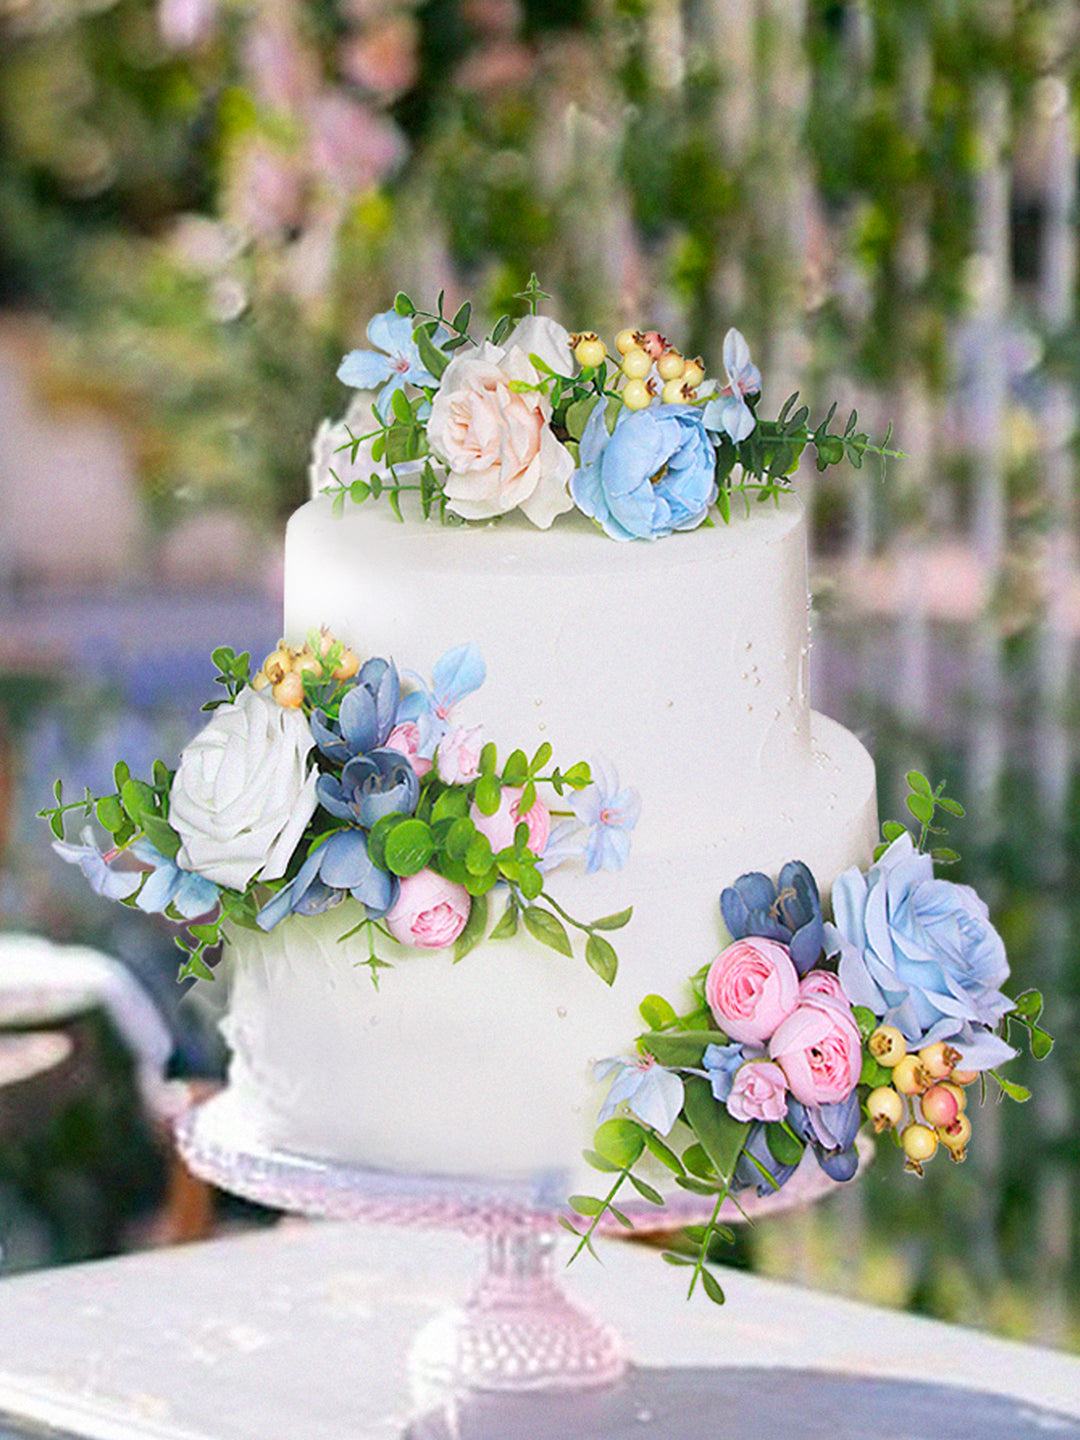 Are Artificial Cake Decorating Flowers Safe? Unveiling the Truth: Safety and Use - Rinlong Flower